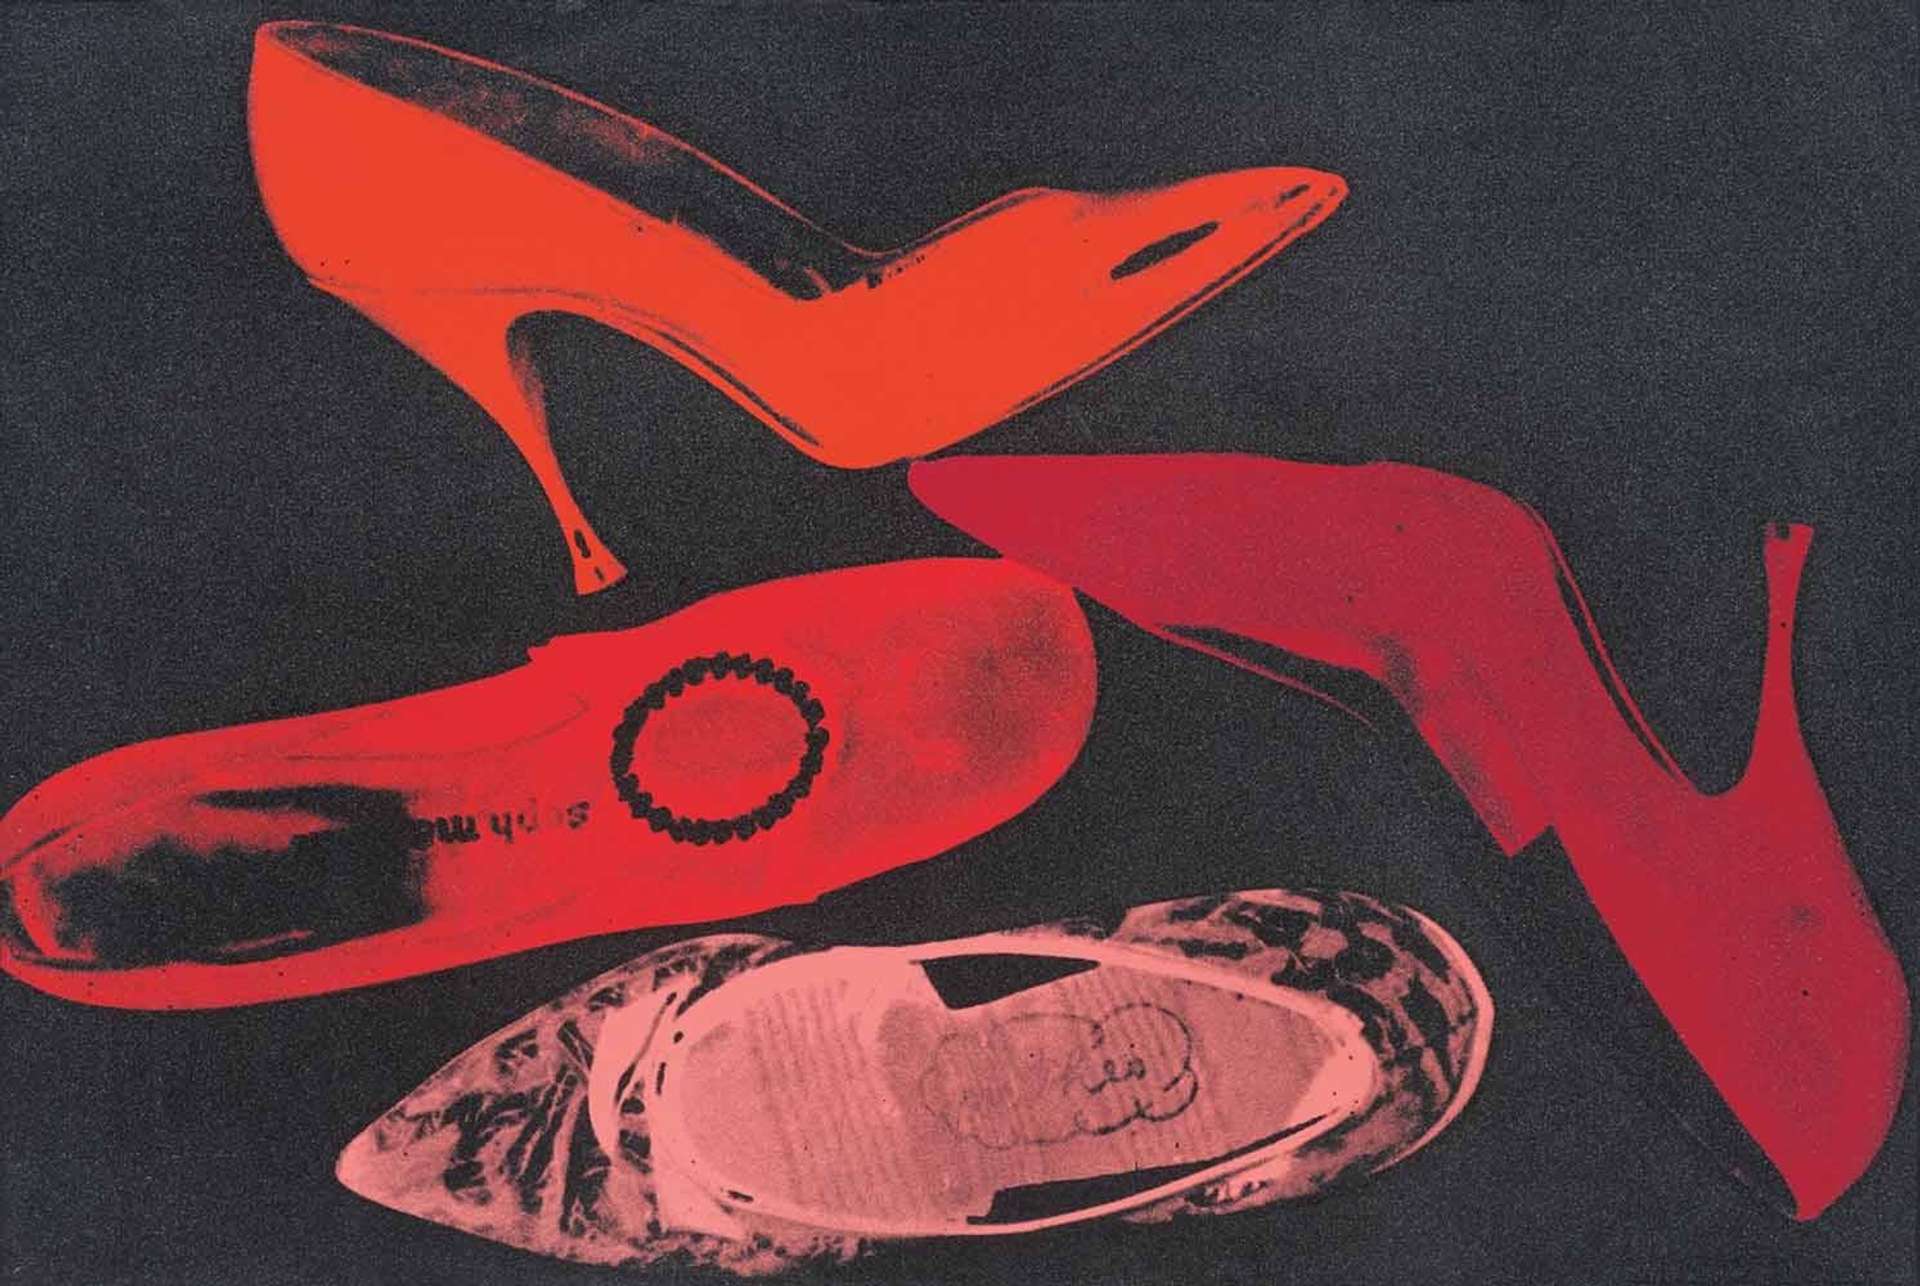 Andy Warhol Diamond Dust Shoes (F. & S. ) (Signed Print) 1980